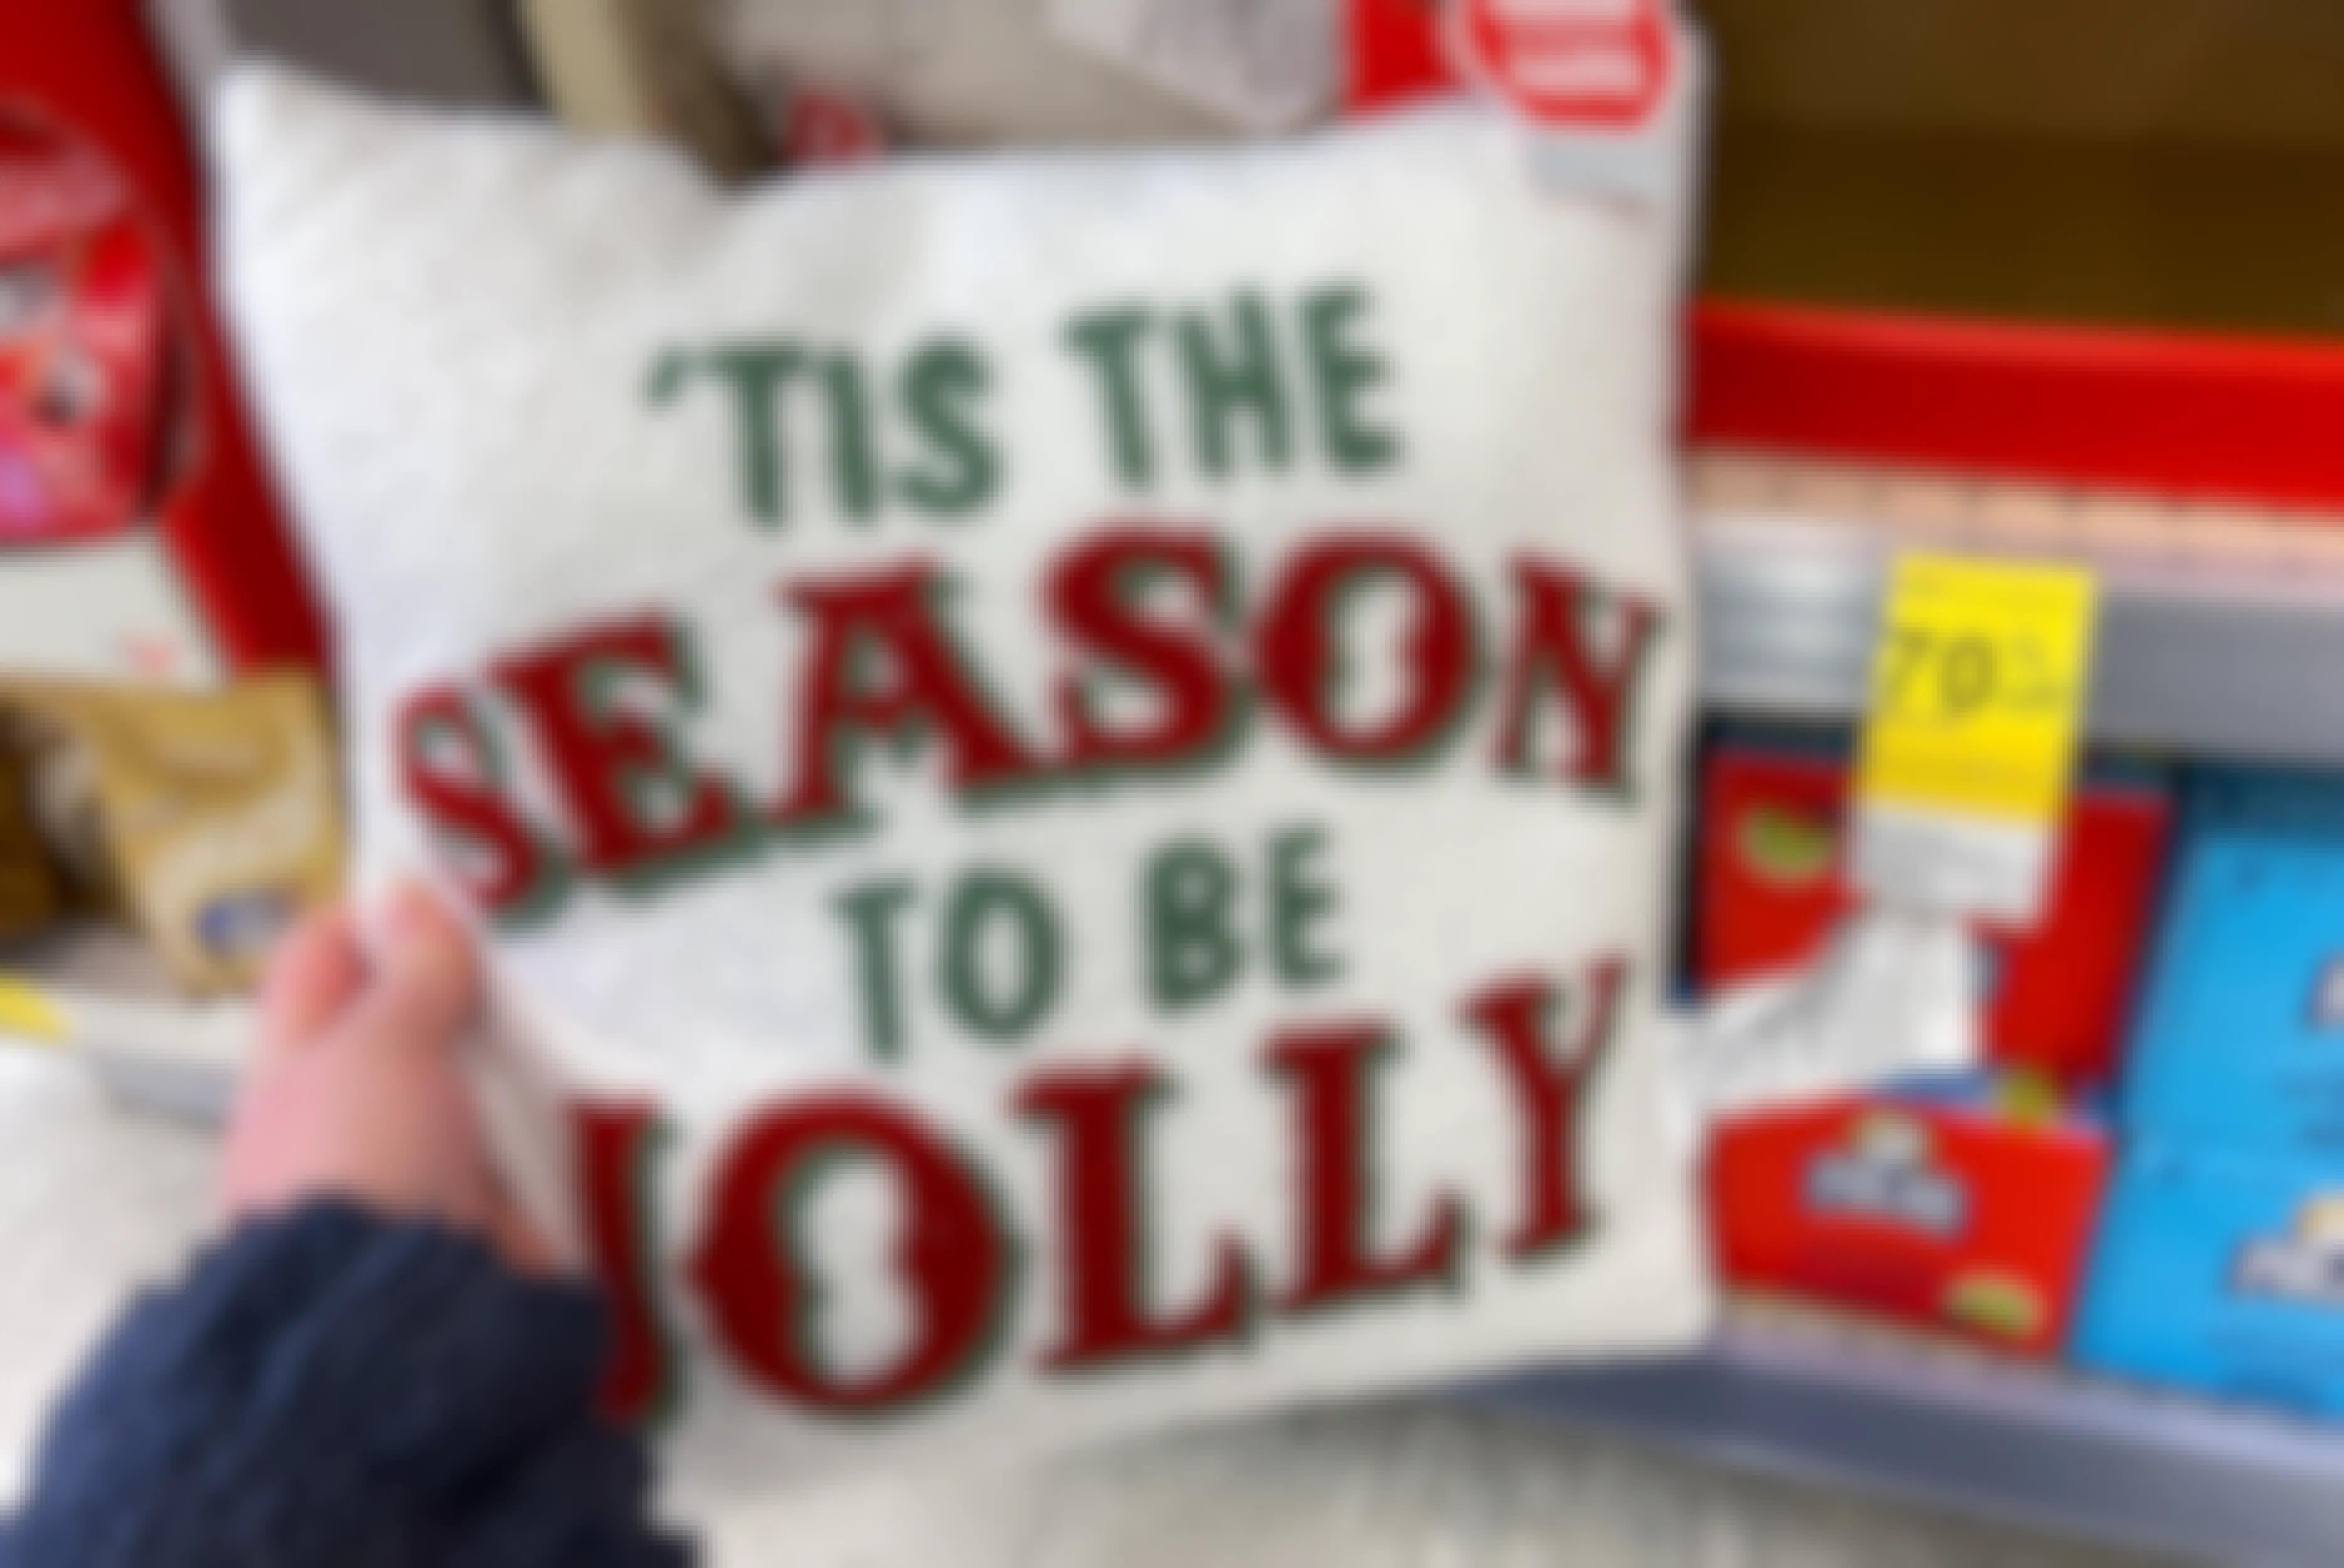 A person holding a pillow that says 'Tis the season to be jolly.